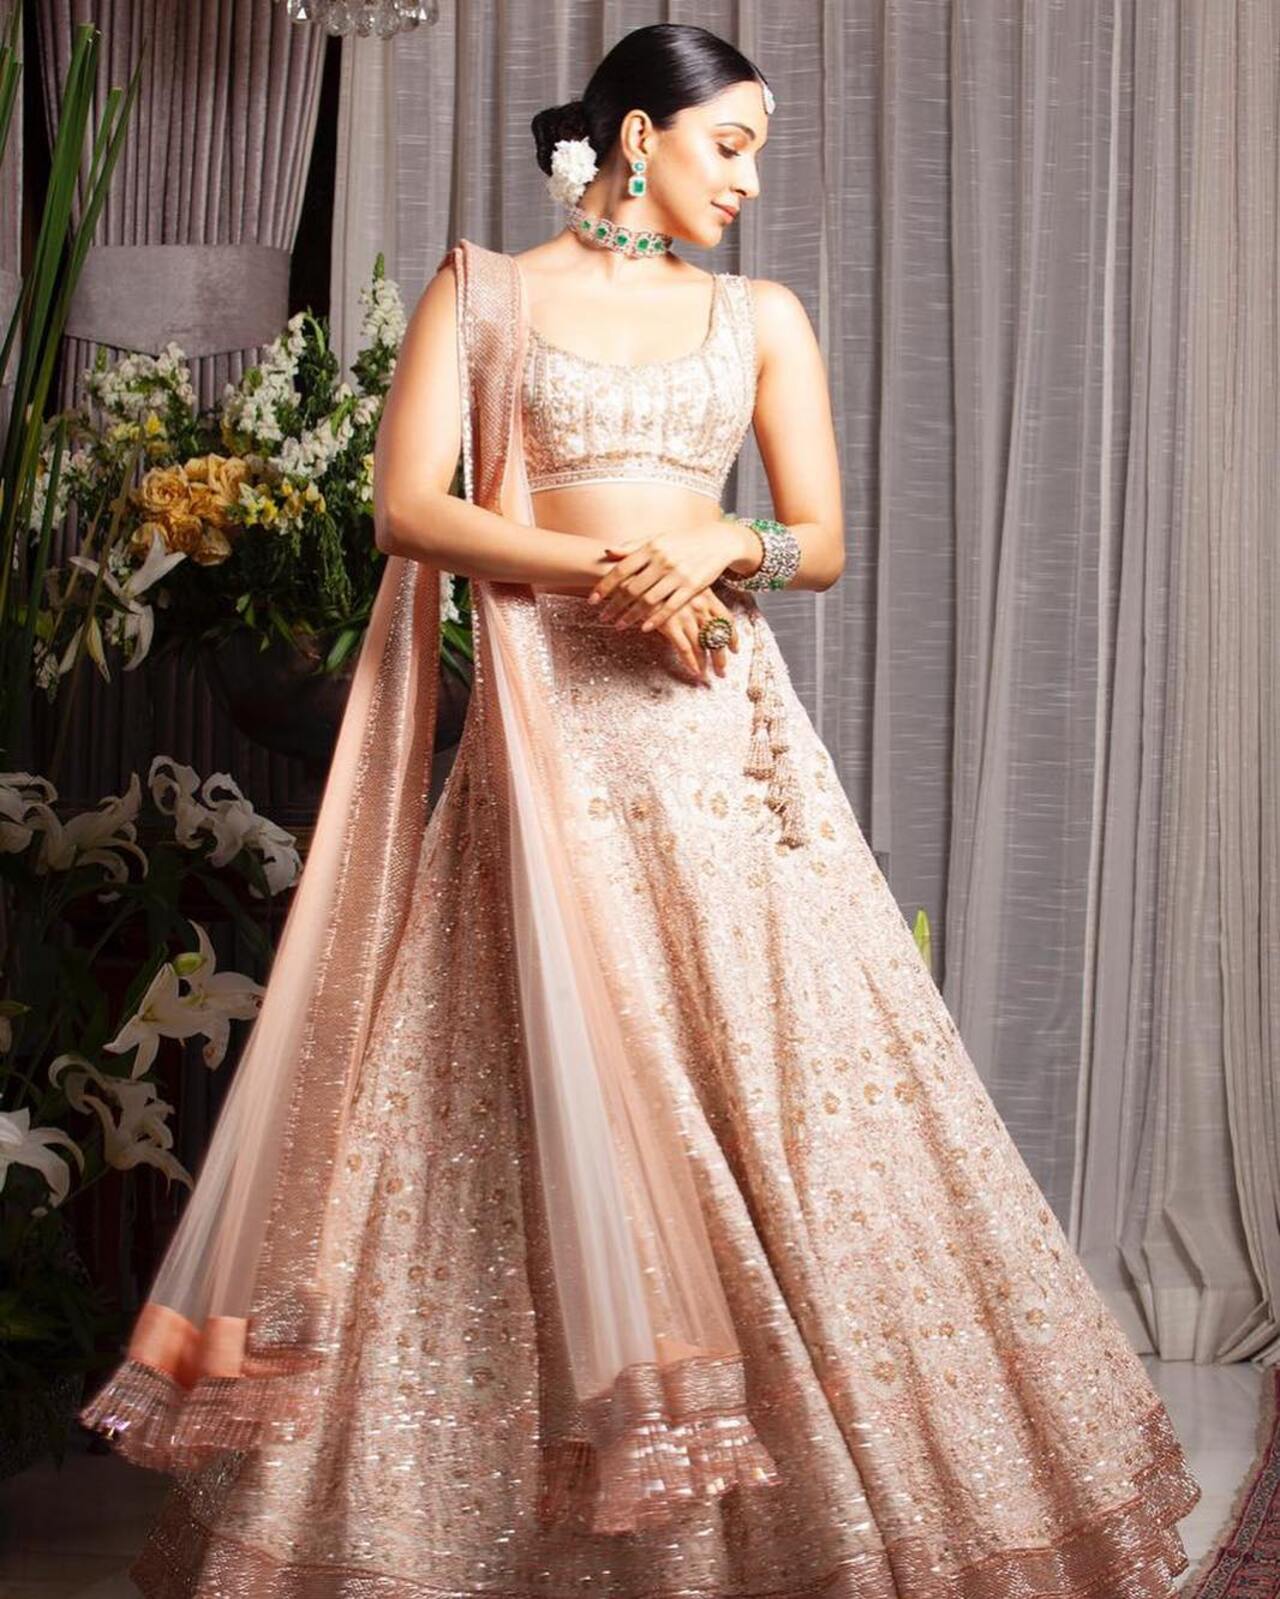 Kiara's blush pink lehenga is fit for a bride-to-be (or her best friends)! This beautiful chikankari lehenga with its light and breezy fit is the perfect ensemble for a summer wedding